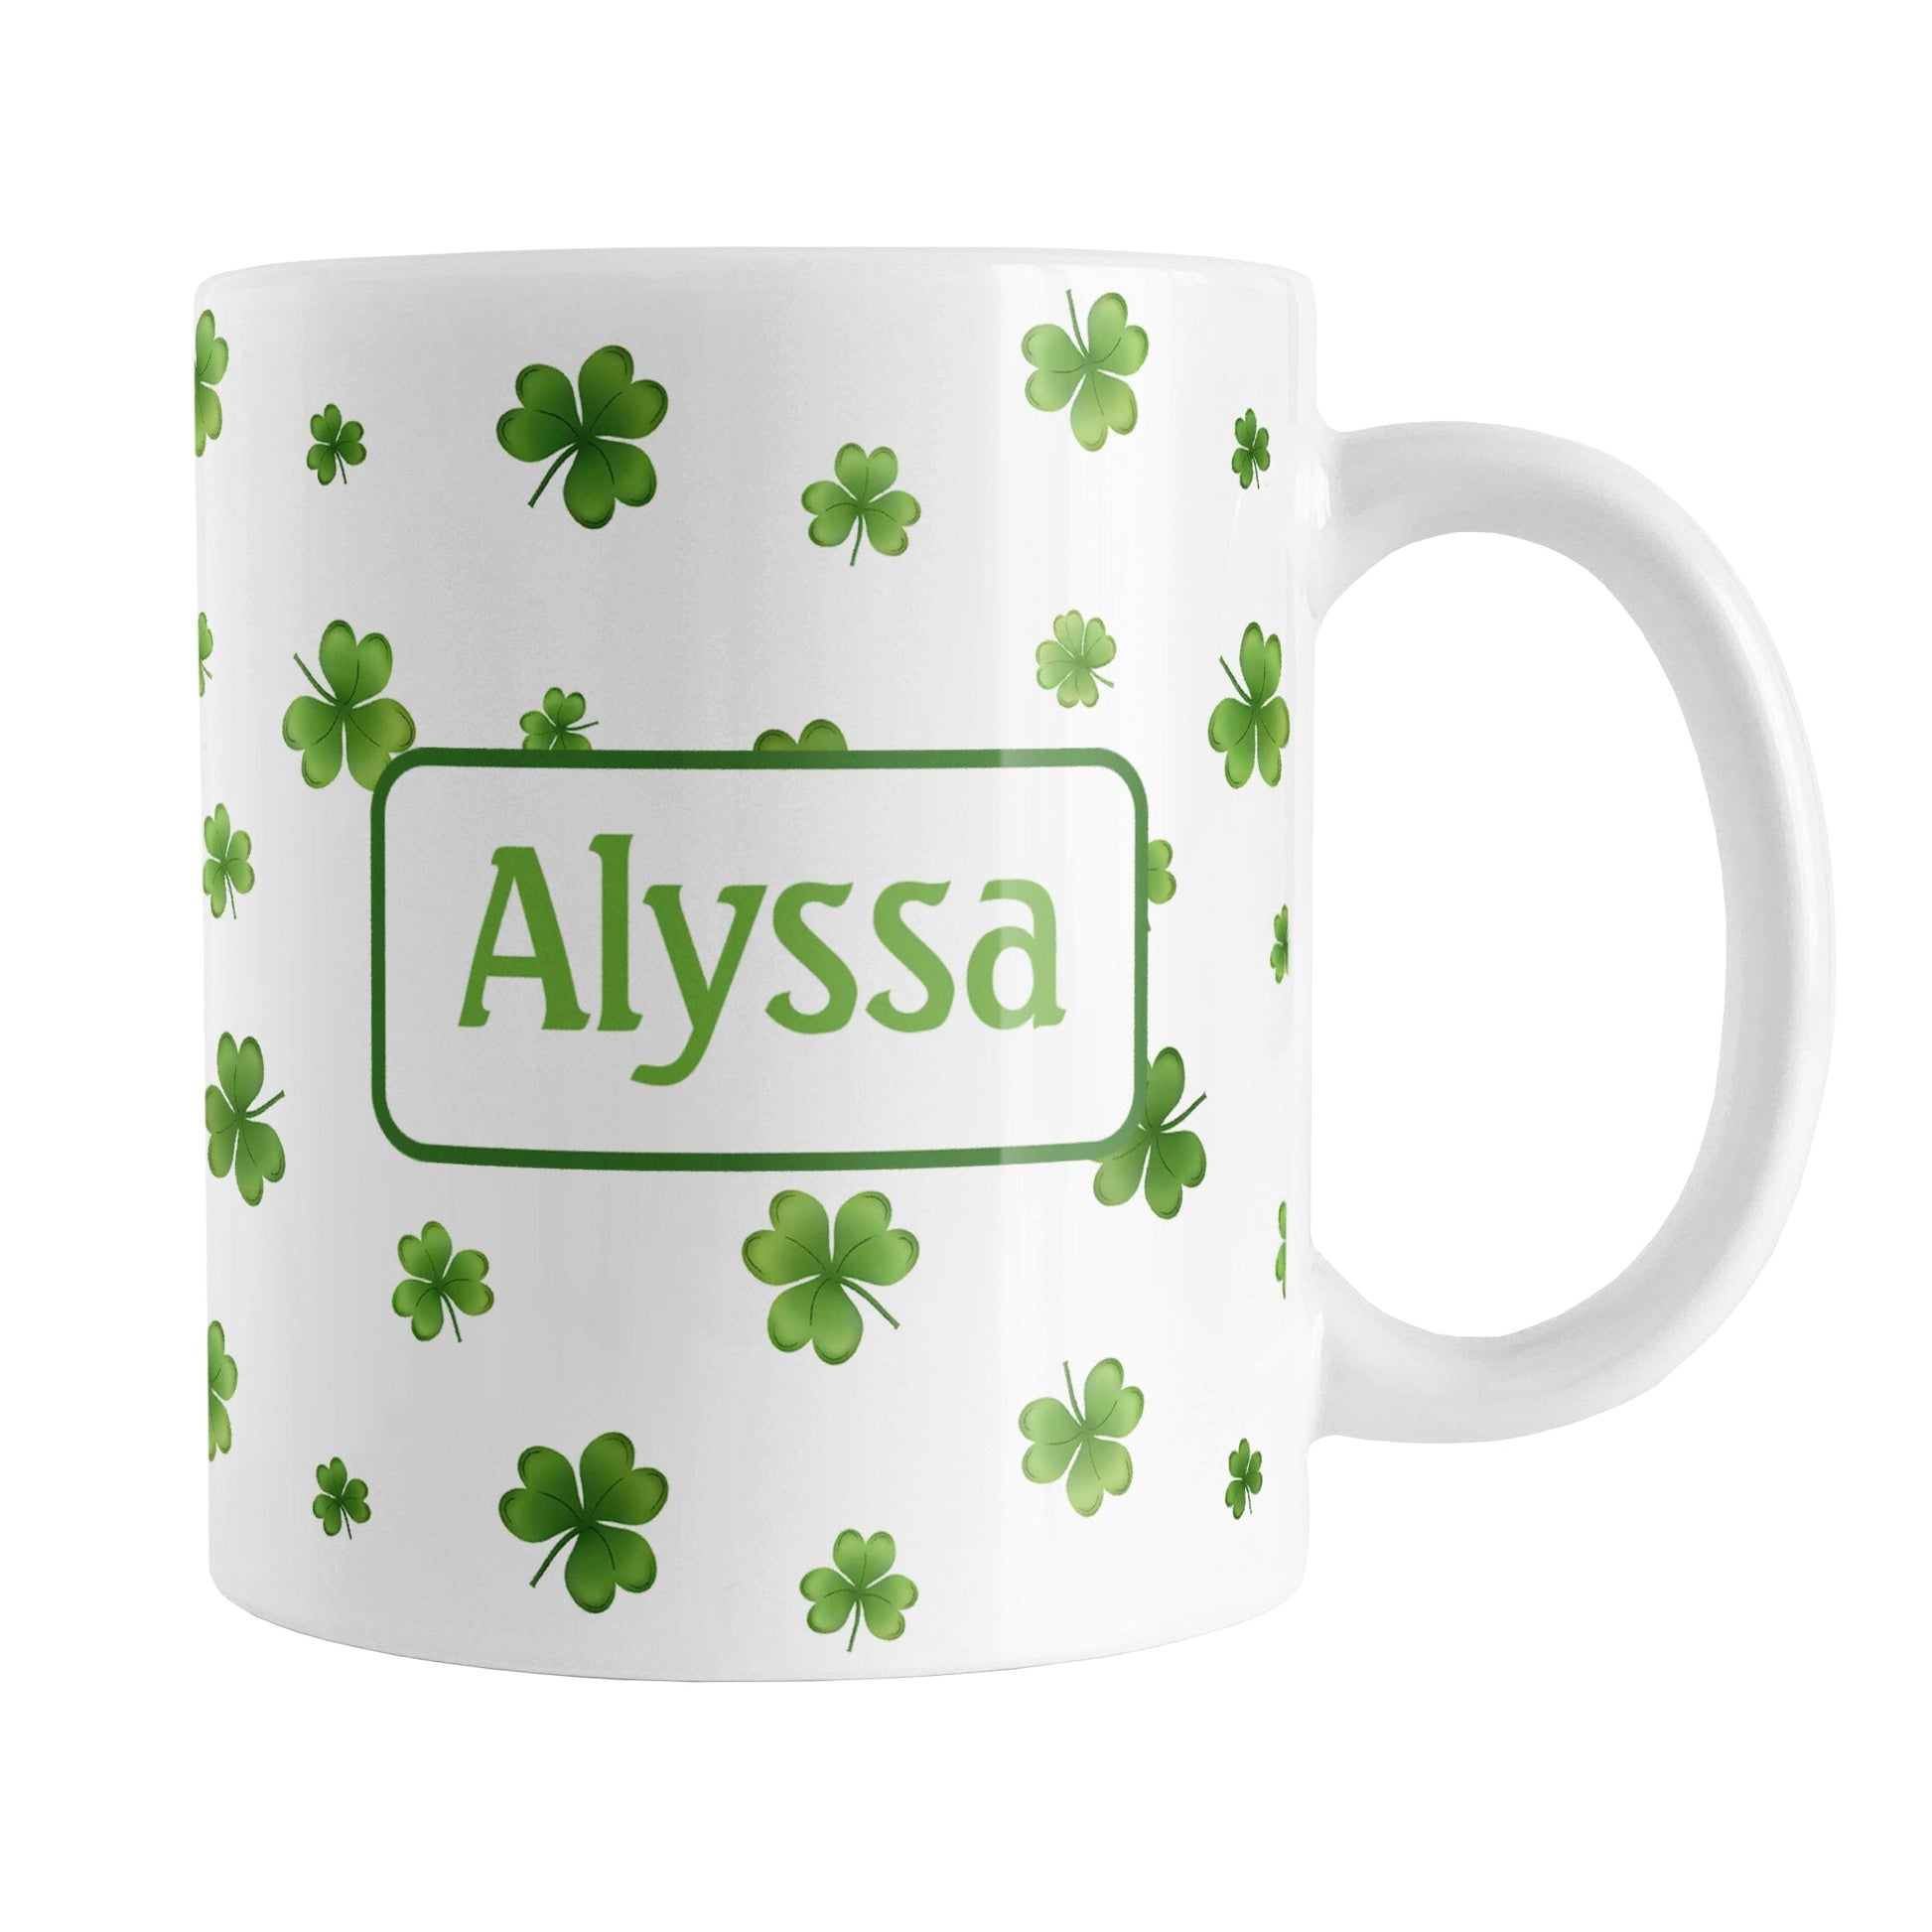 Personalized Dainty Shamrocks and Clovers Mug (11oz) at Amy's Coffee Mugs. A ceramic coffee mug designed with a print of hand-drawn green shamrocks and 4-leaf clovers in a dainty minimalist pattern that wraps around the mug up to the handle. Your personalized name is custom-printed on both sides of the mug in green.